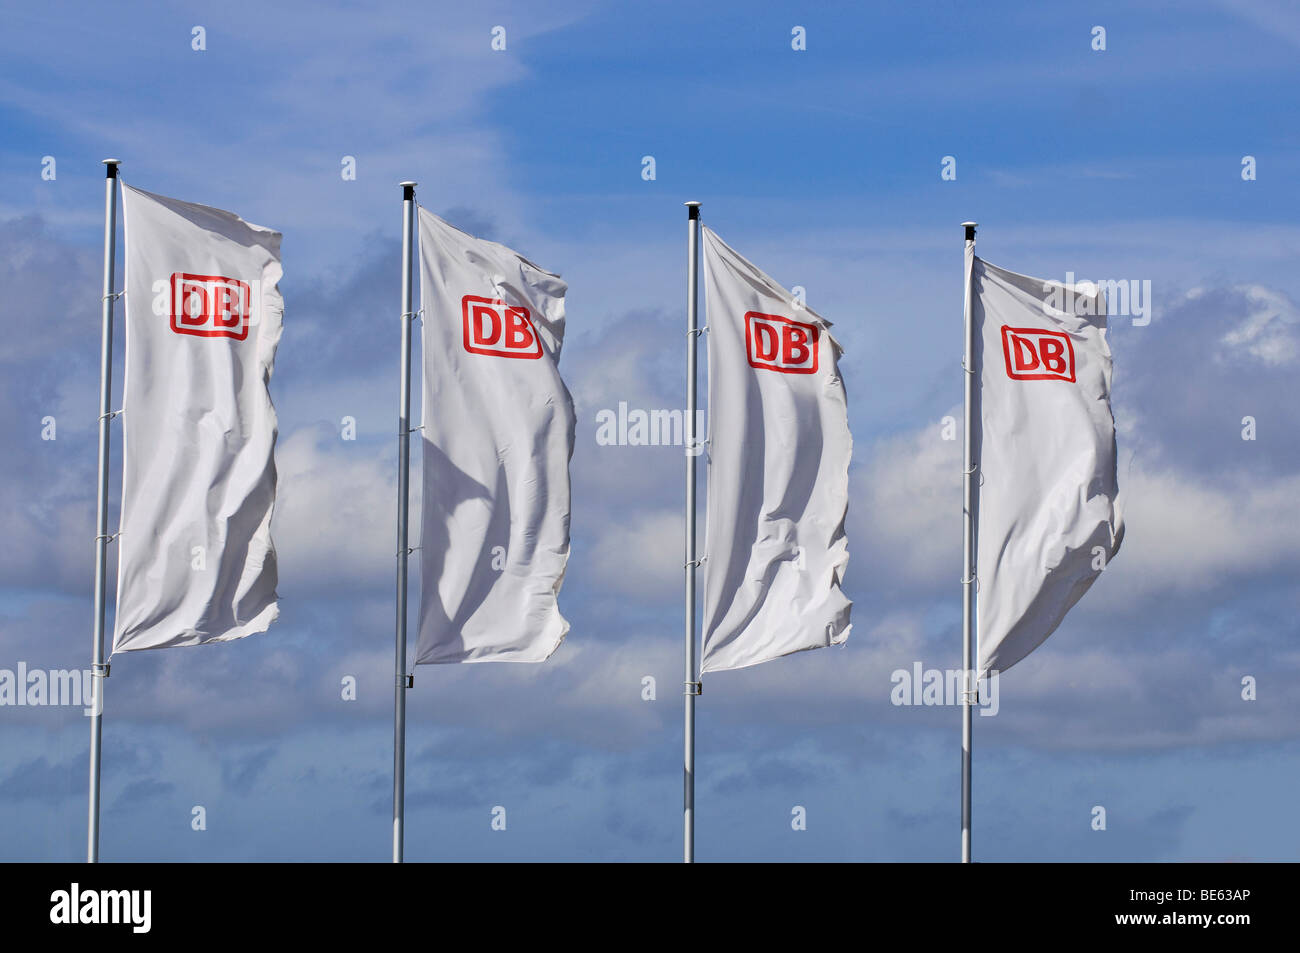 Four windblown white flags with the logo of DB, German Railways, in front of a sunny sky Stock Photo